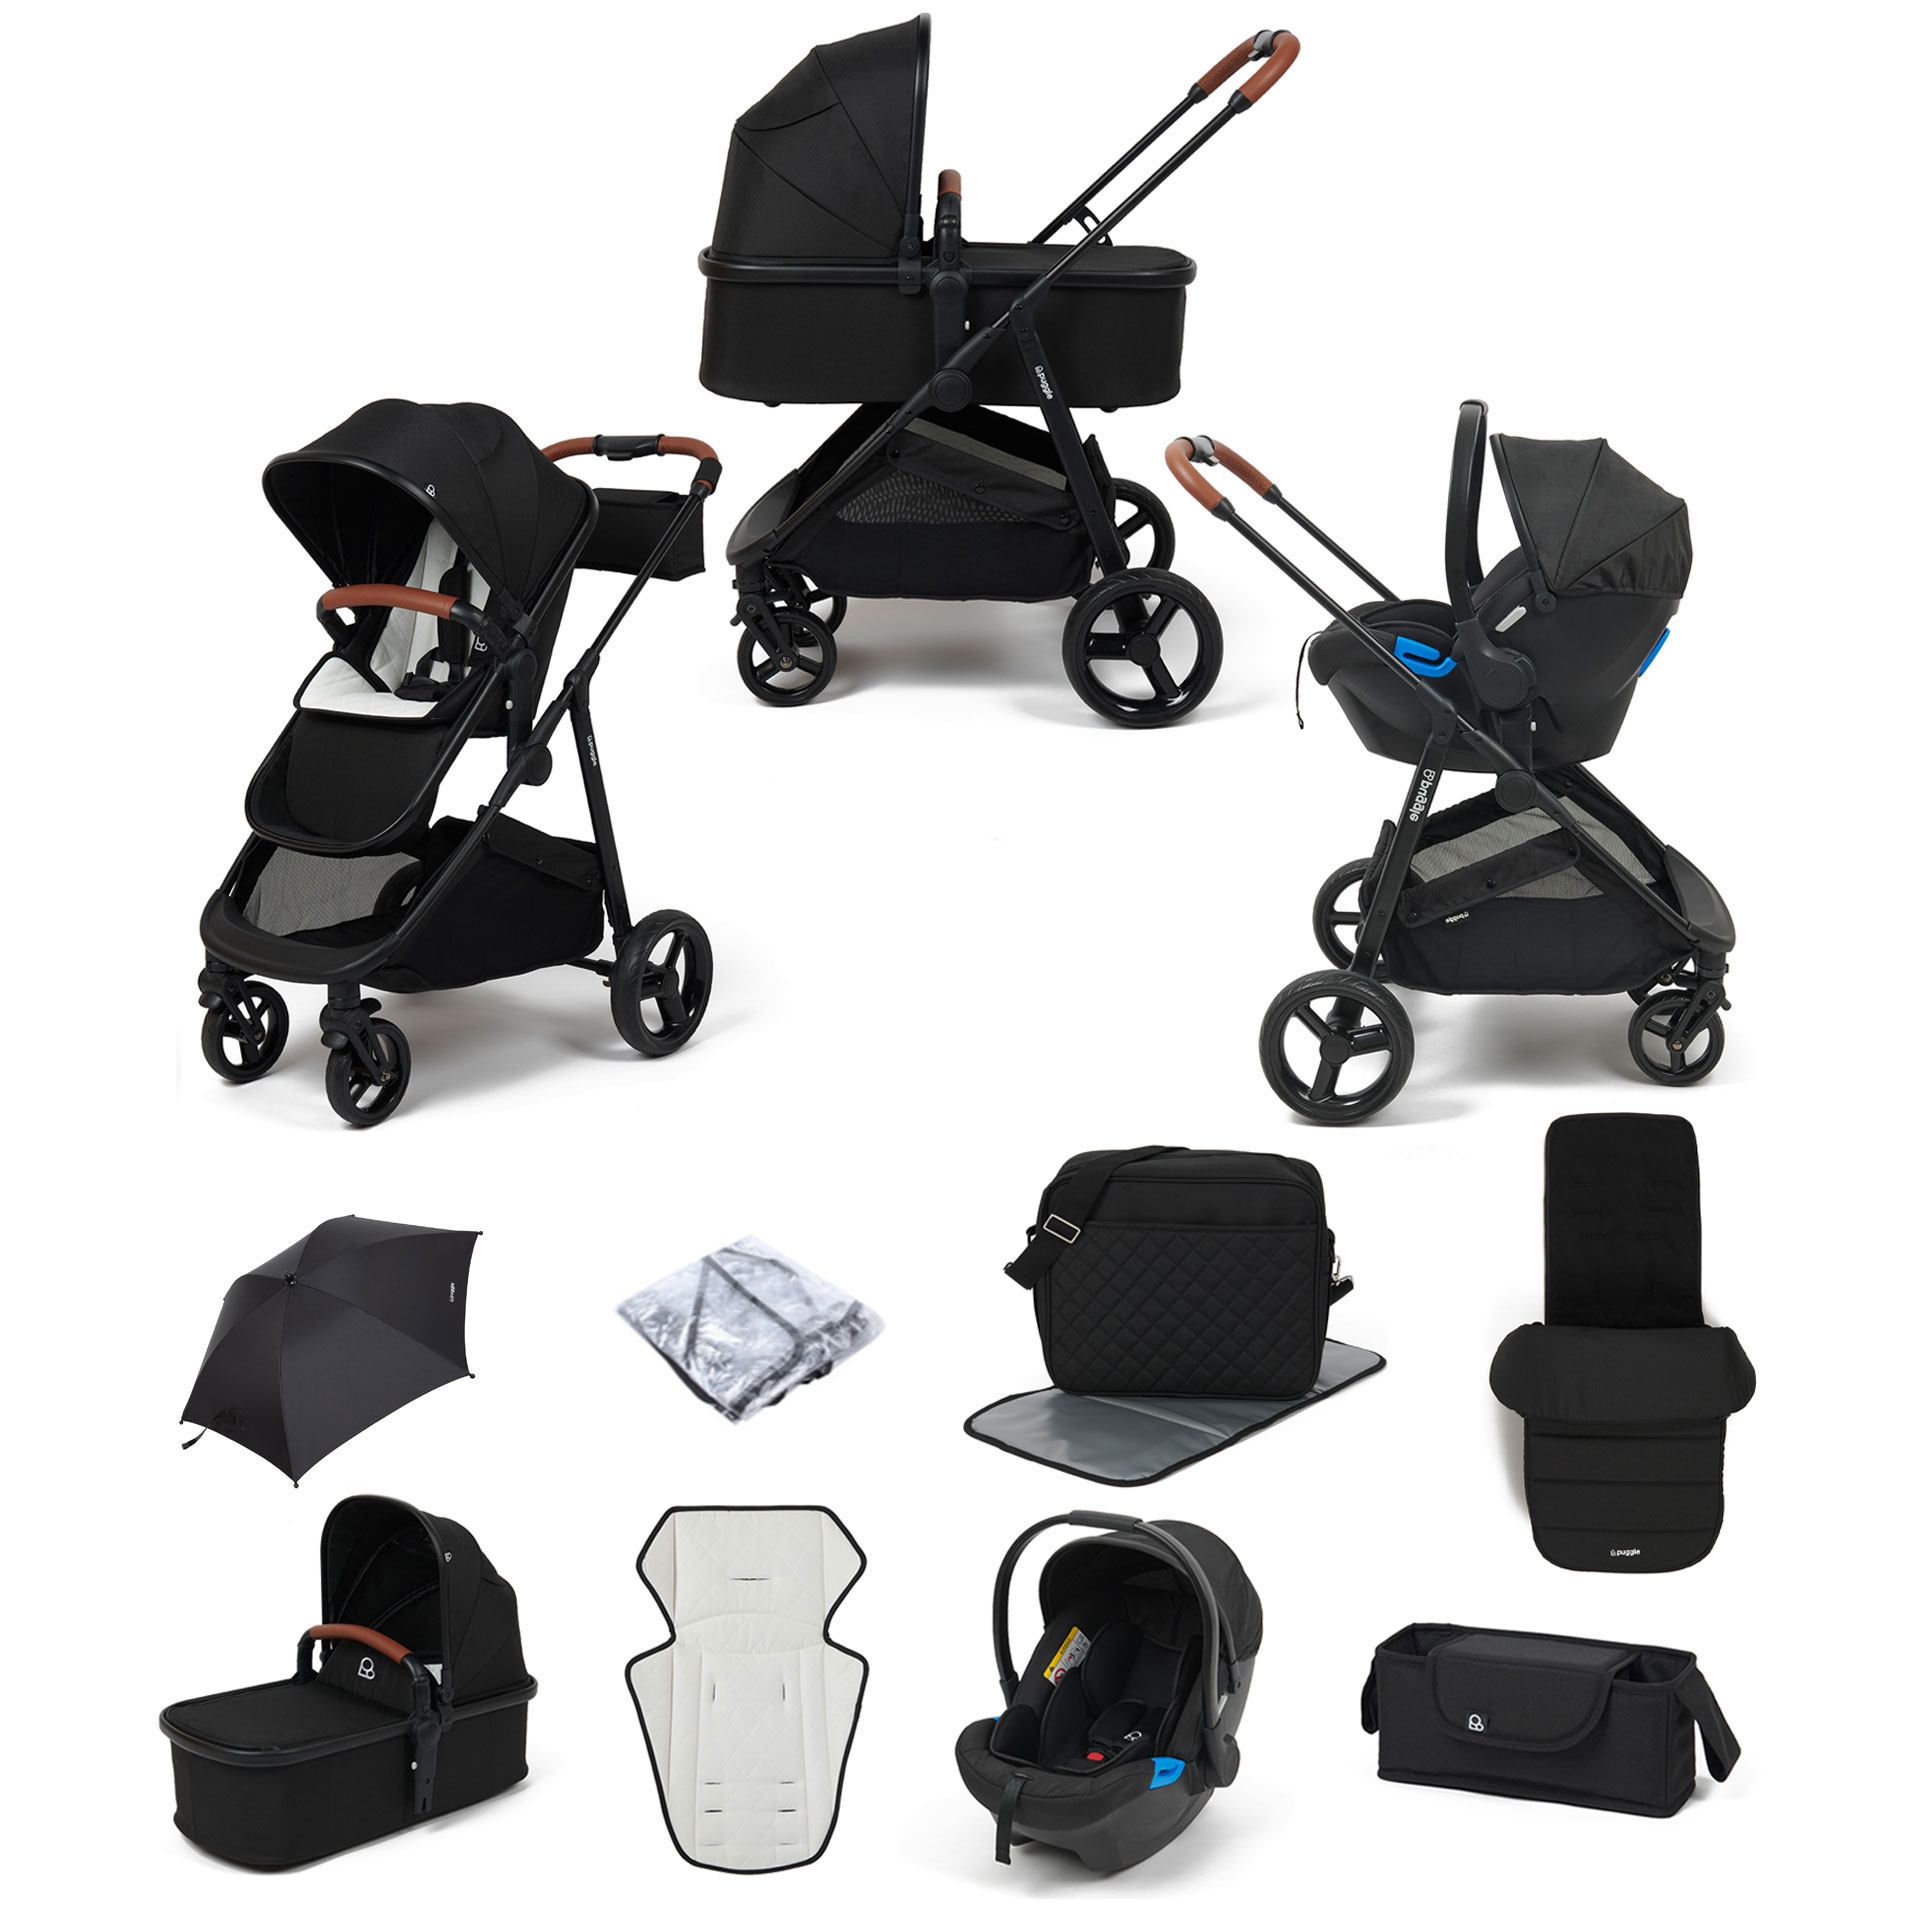 Puggle Monaco XT 3in1 Travel System with Organiser, Parasol, Footmuff & Changing Bag - Storm Black